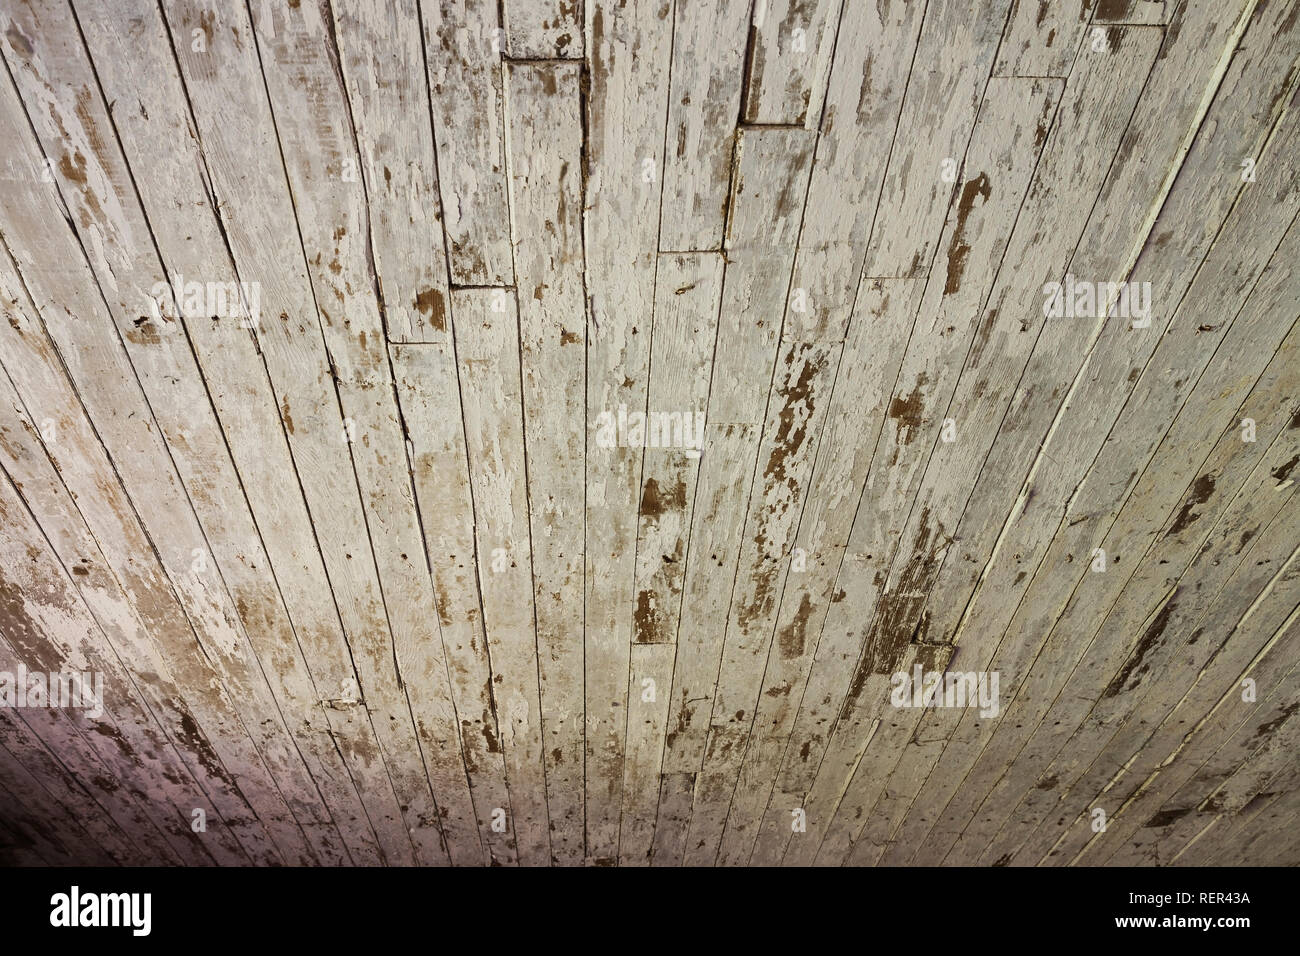 Close Up Of Faded White Painted Wood Planked Ceiling With Water